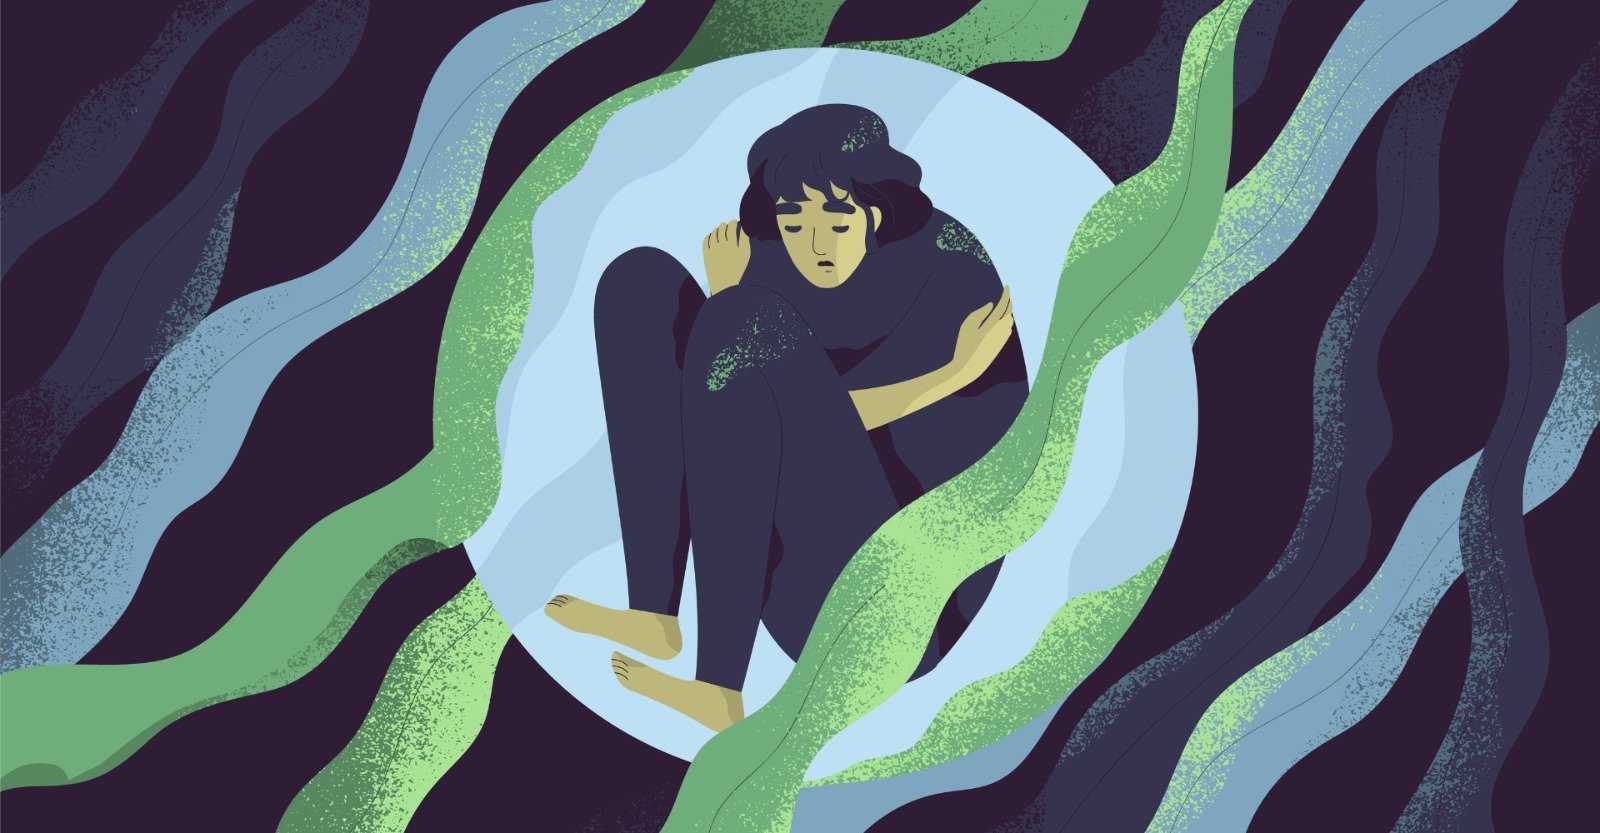 image of a person embracing themselves seated within a bubble of solitude, surrounded by green leaf-like patterns against a dark blue background